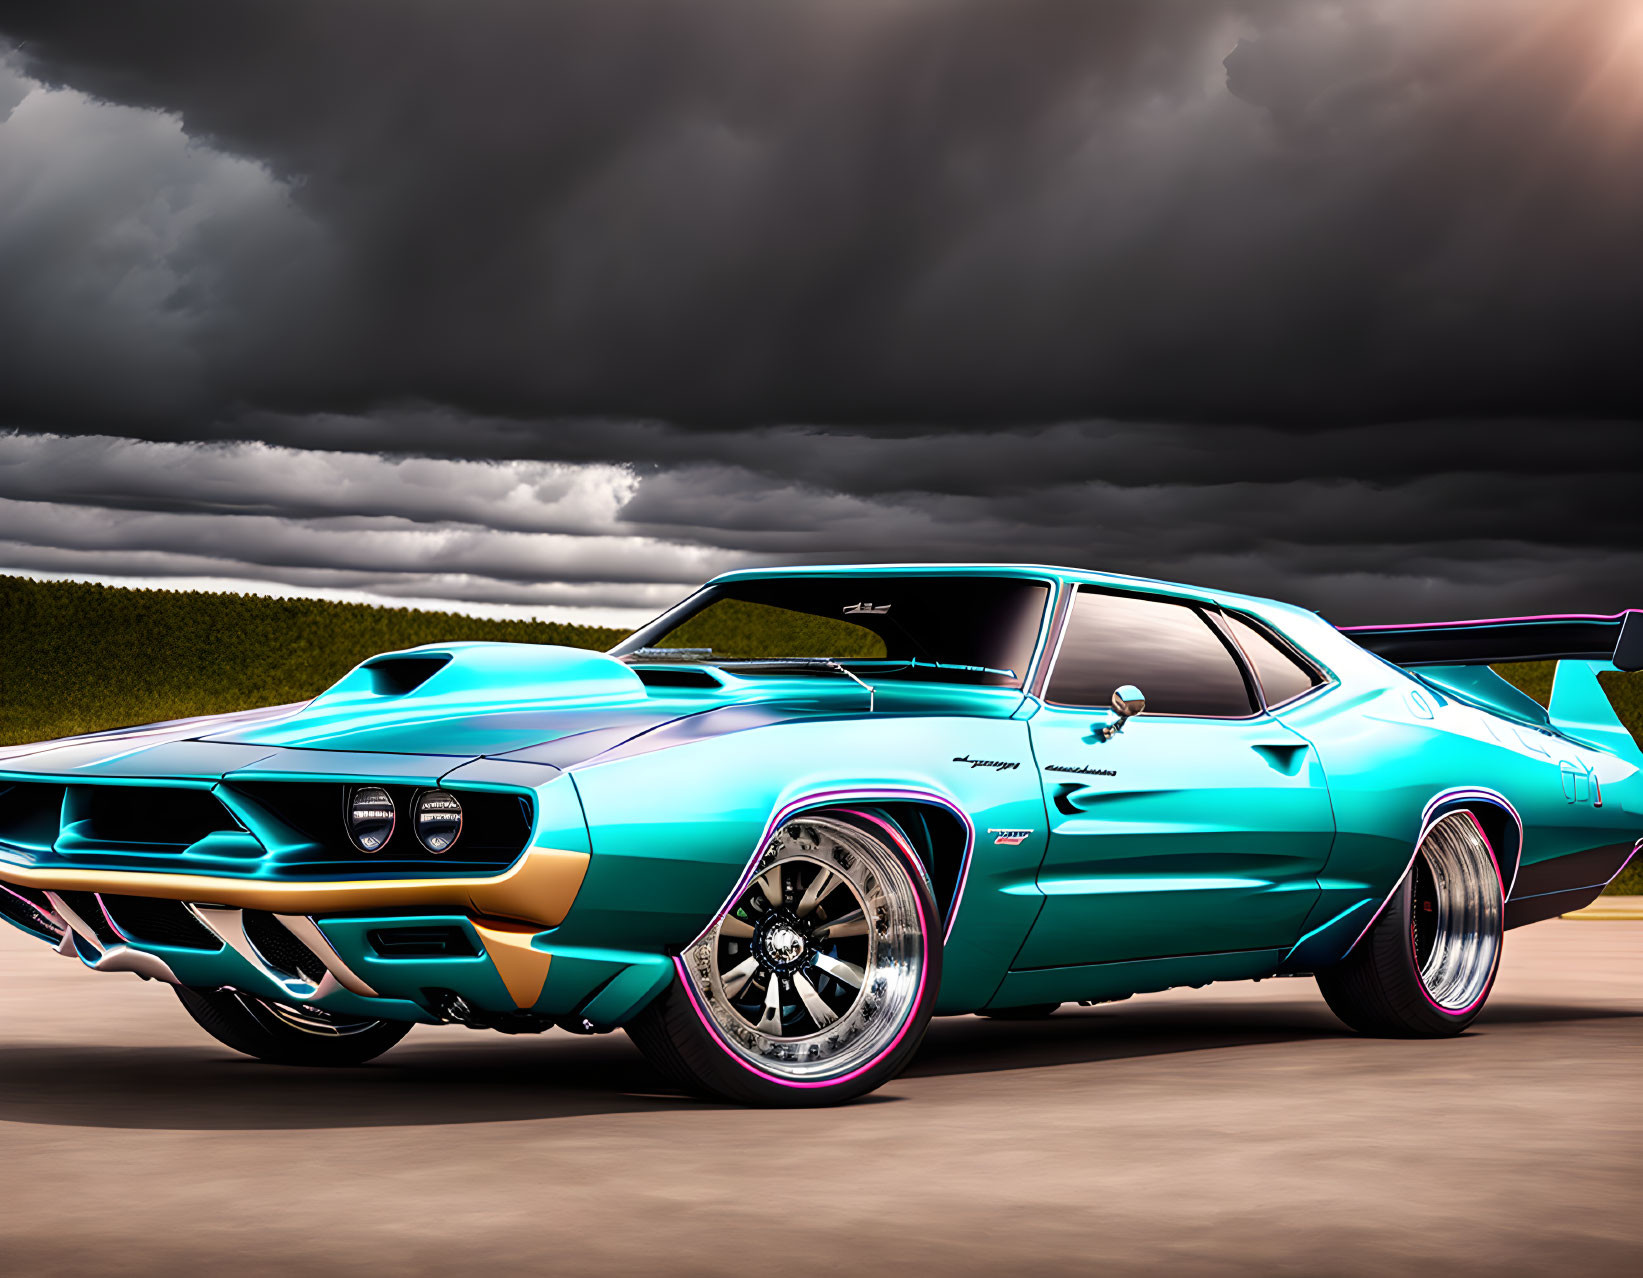 Vintage muscle car with turquoise paint and custom wheels under dramatic cloudy sky